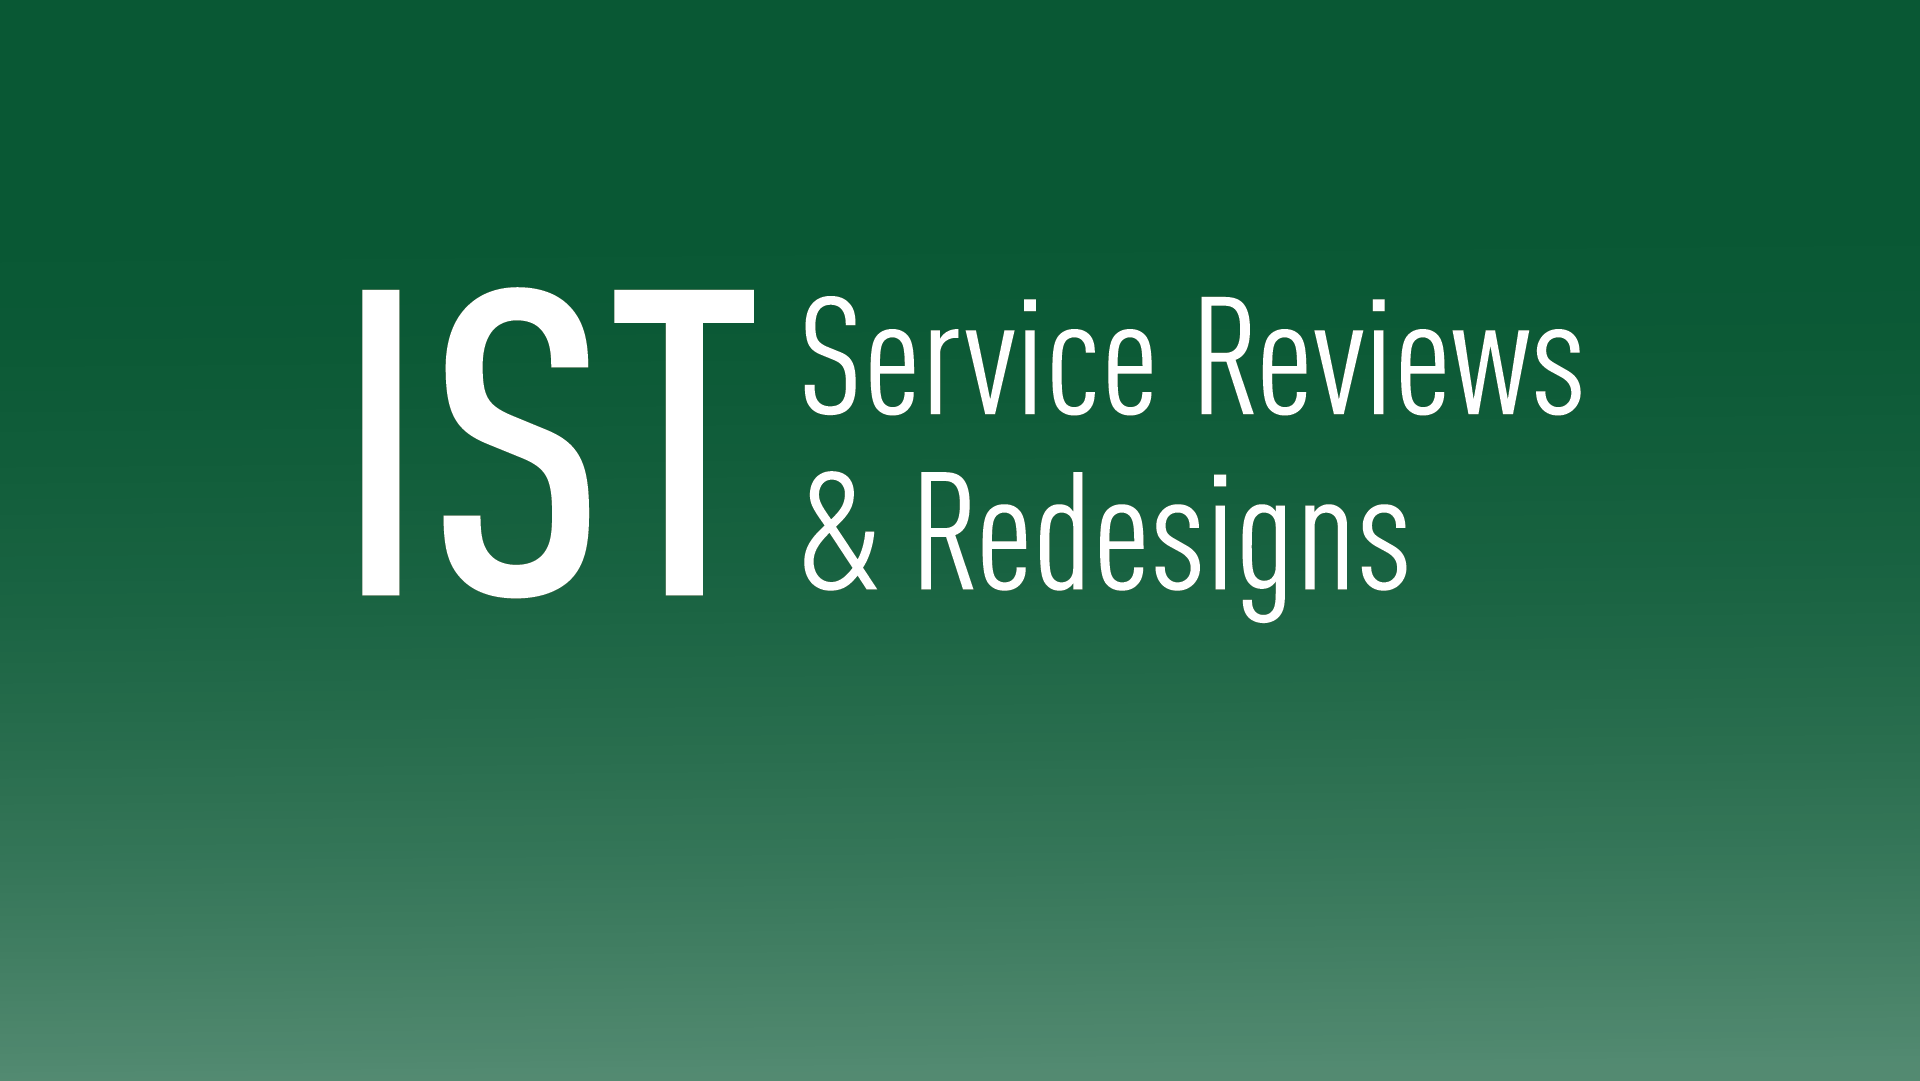 ist_service_reviews_2019-blog.png